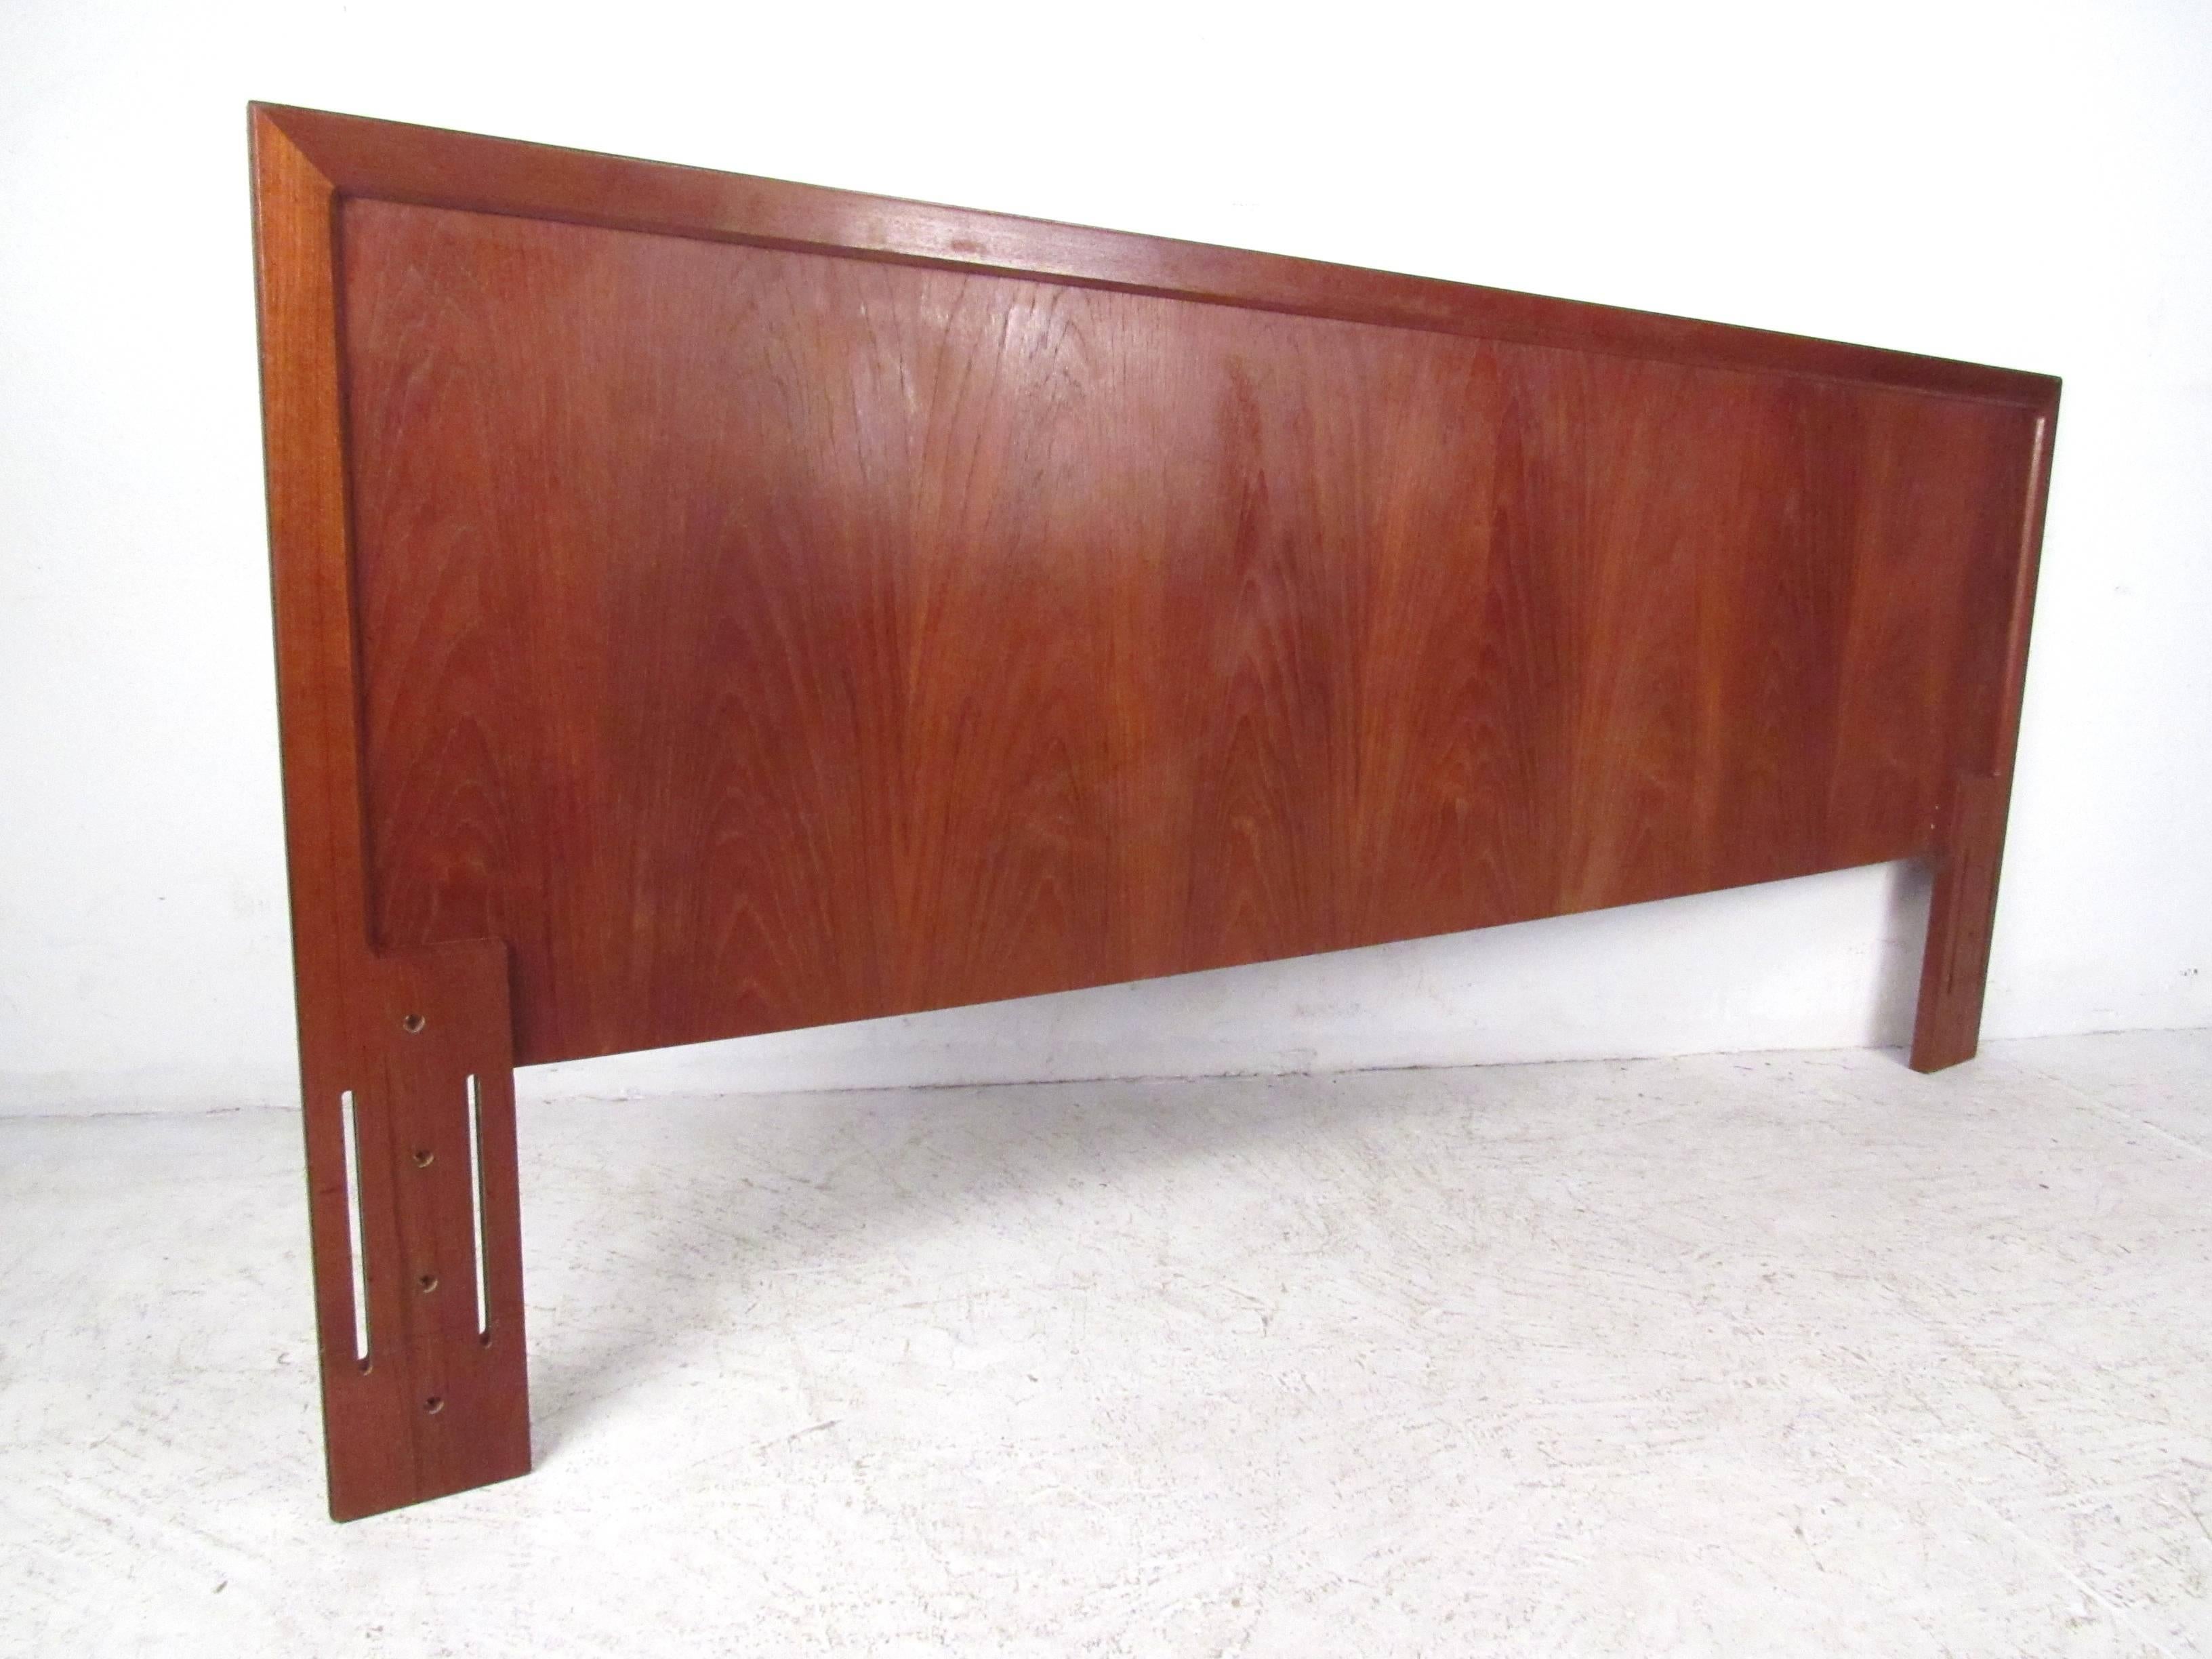 This vintage teak headboard measures 78 inches wide and makes a beautiful vintage addition to any Mid-Century style bedroom. Please confirm item location (NY or NJ).